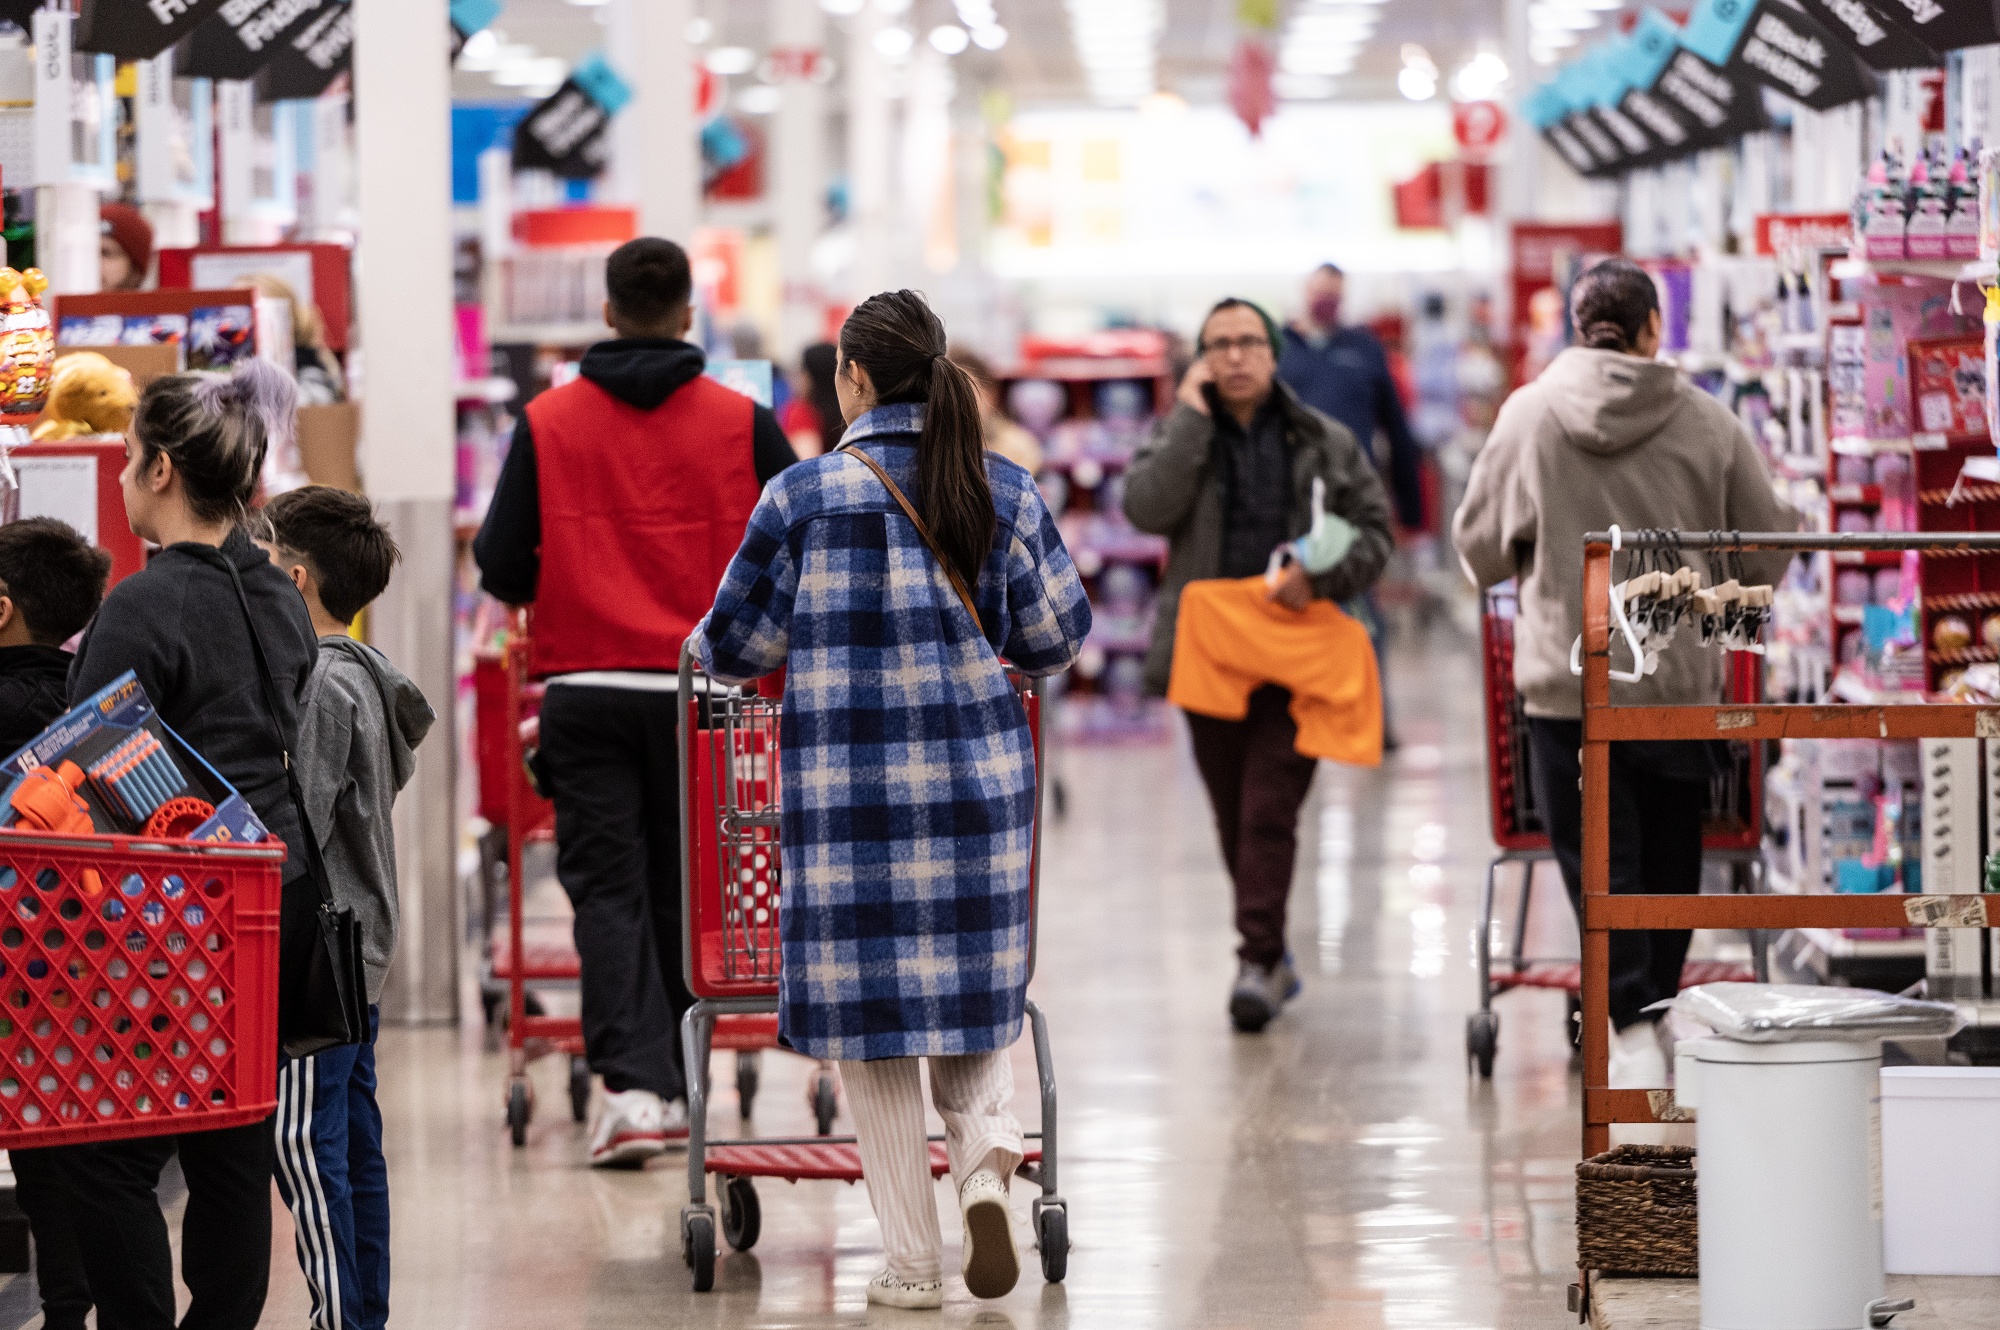 Retailers offer big deals for Black Friday but will shoppers spend?, Economy and Business